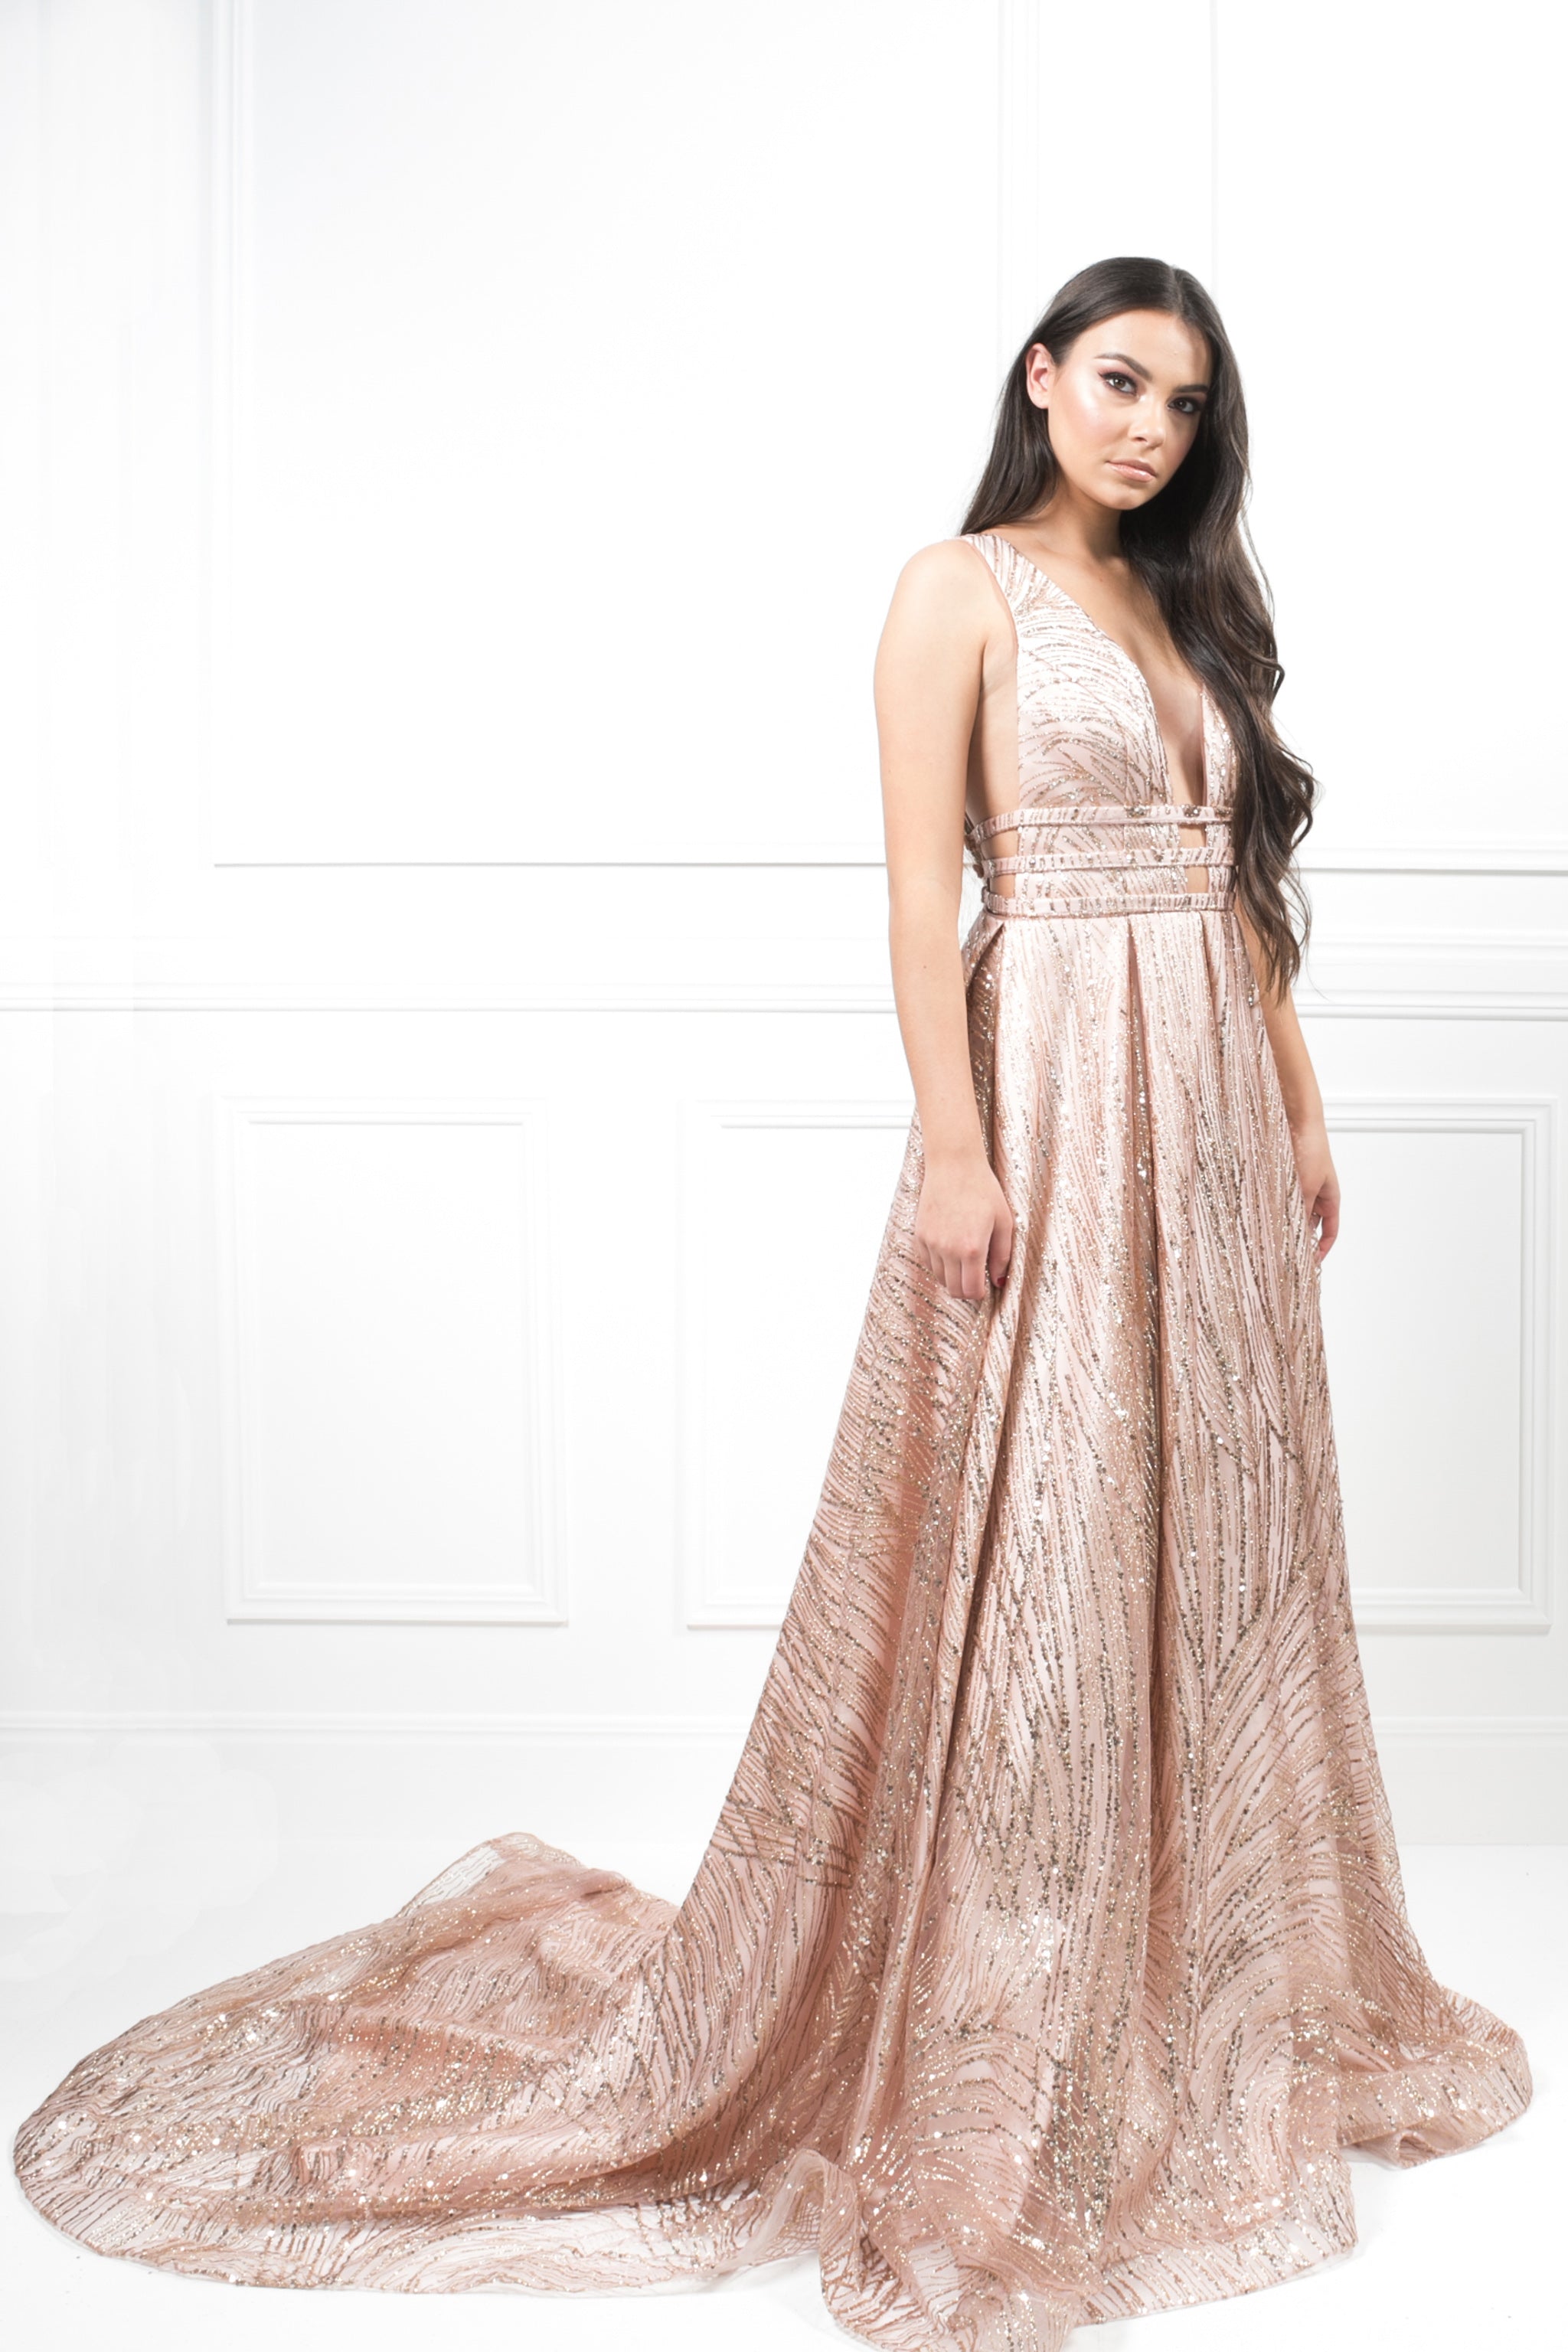 Honey Couture ZOEY Gold Glitter Infused Formal Ball Gown Private Label$ AfterPay Humm ZipPay LayBuy Sezzle